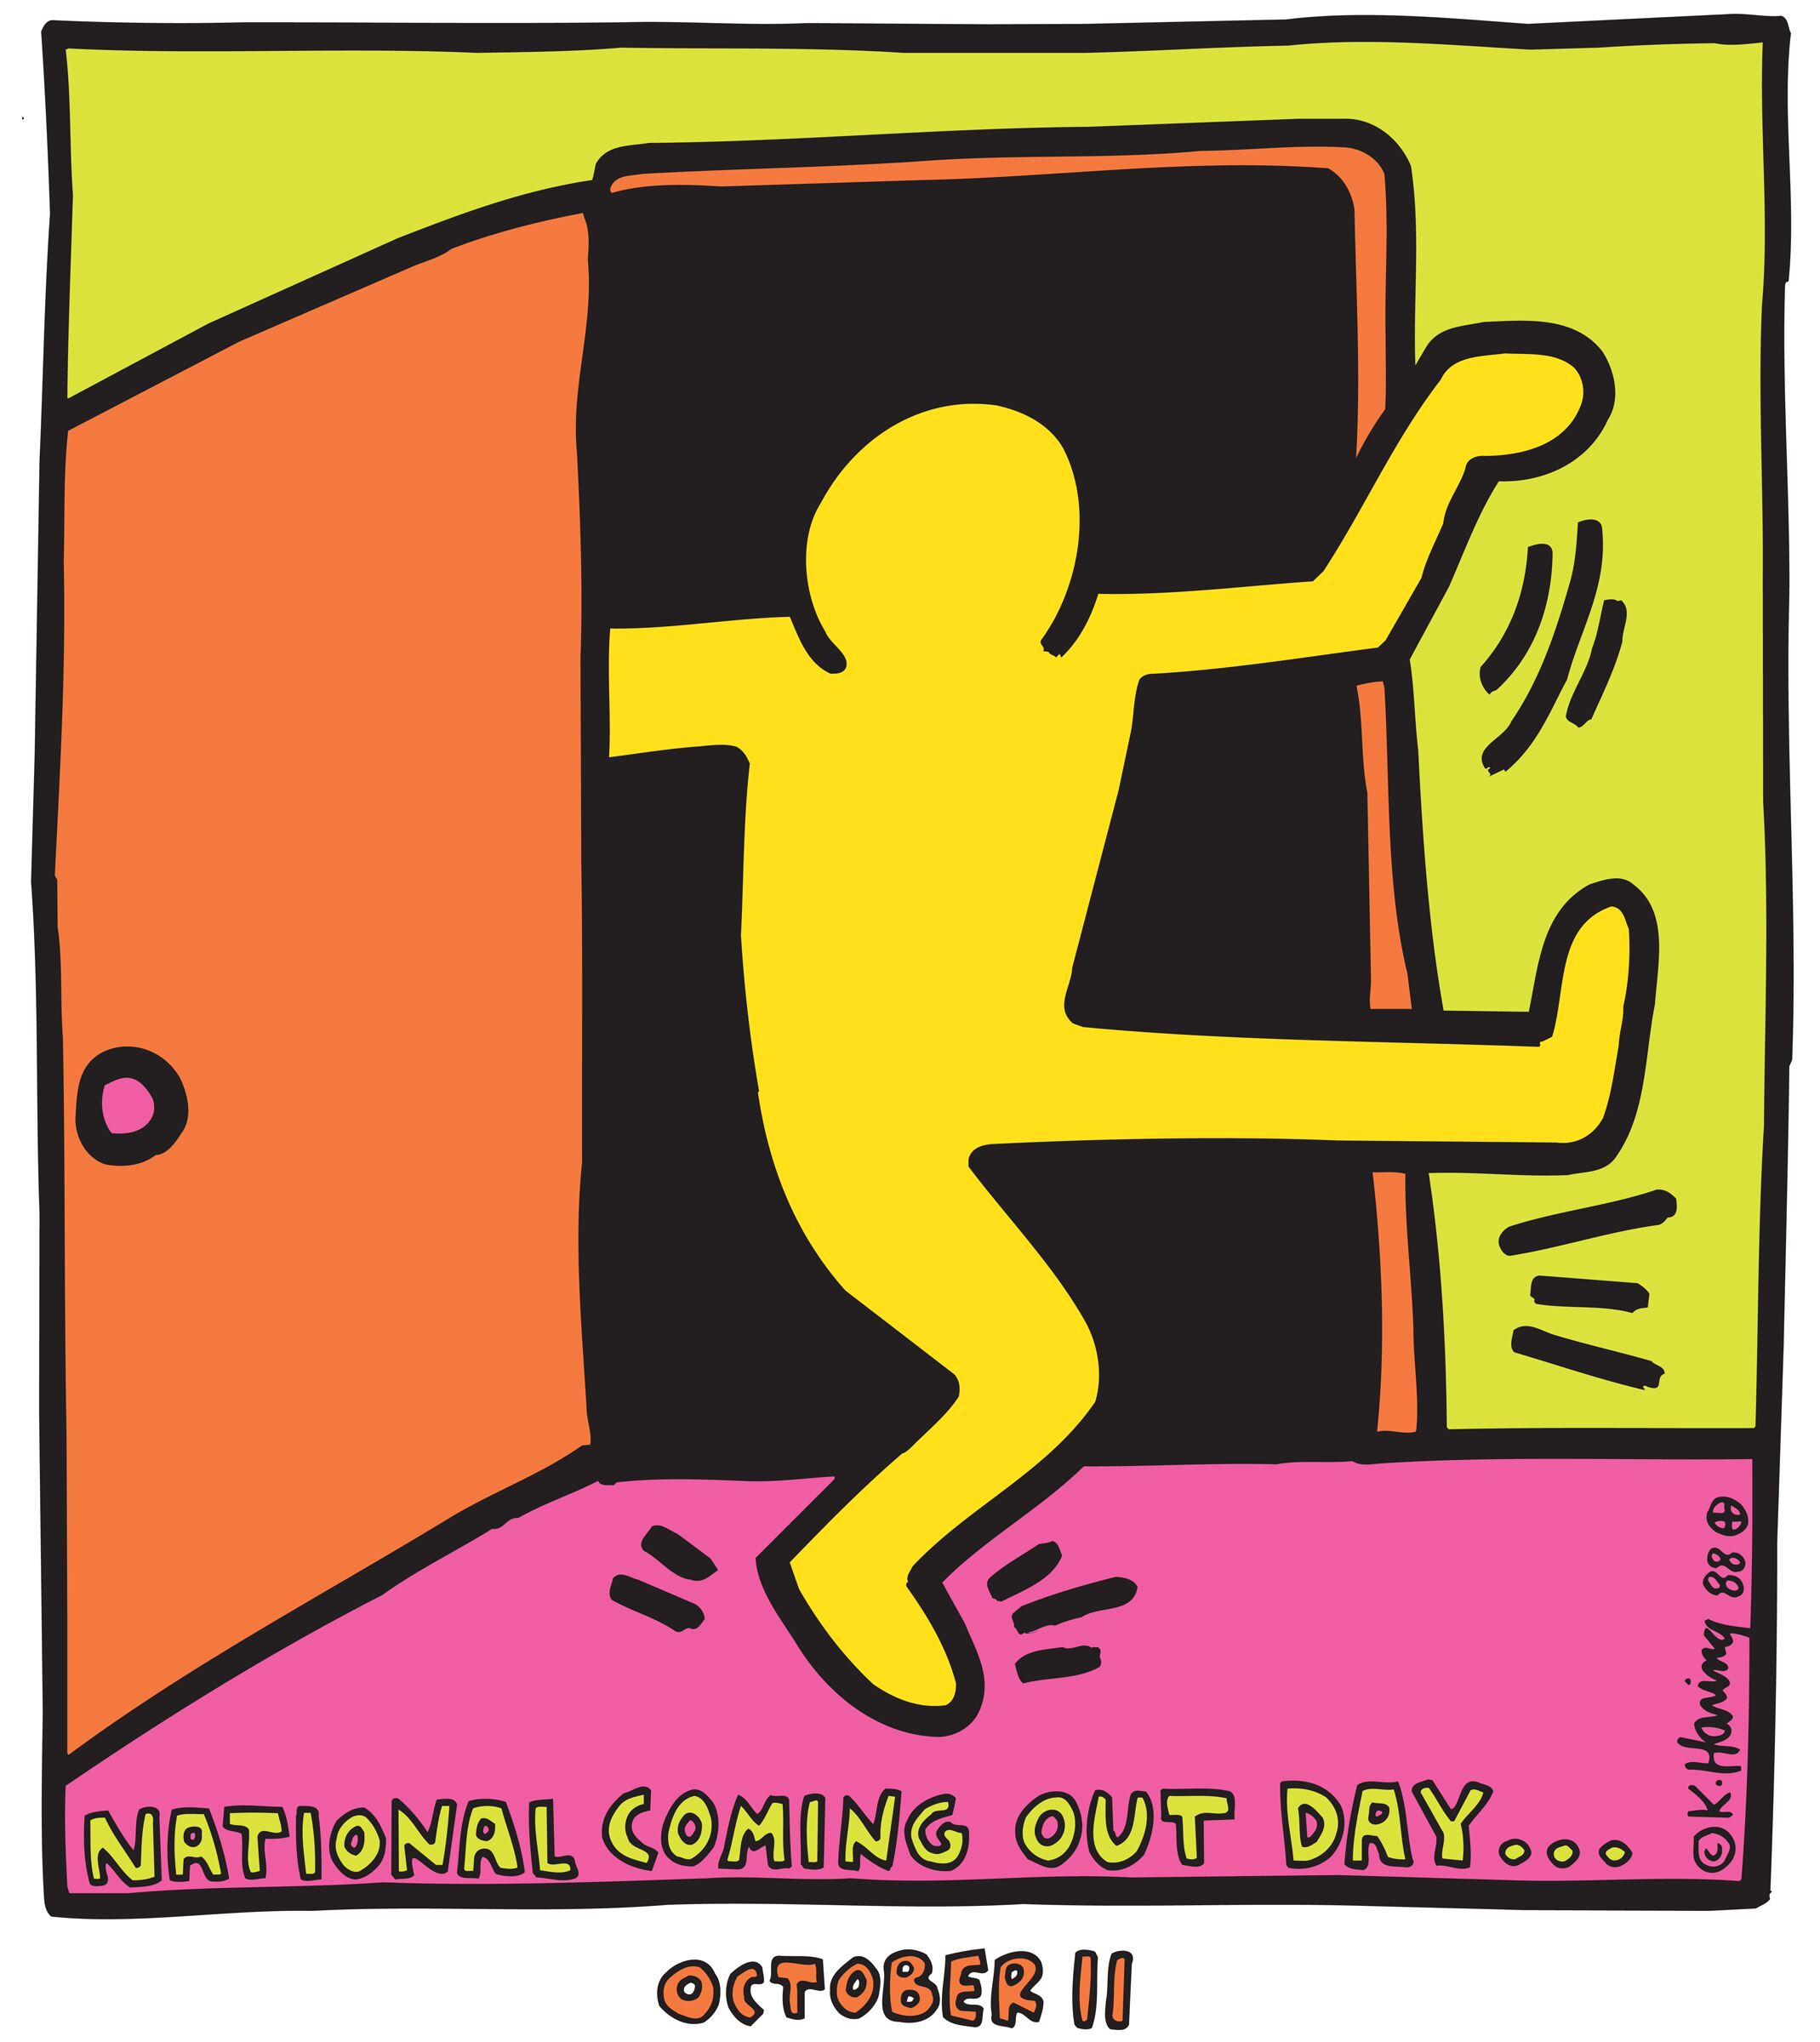 National Coming Out Day Logo designed by Keith Haring - from elm.org